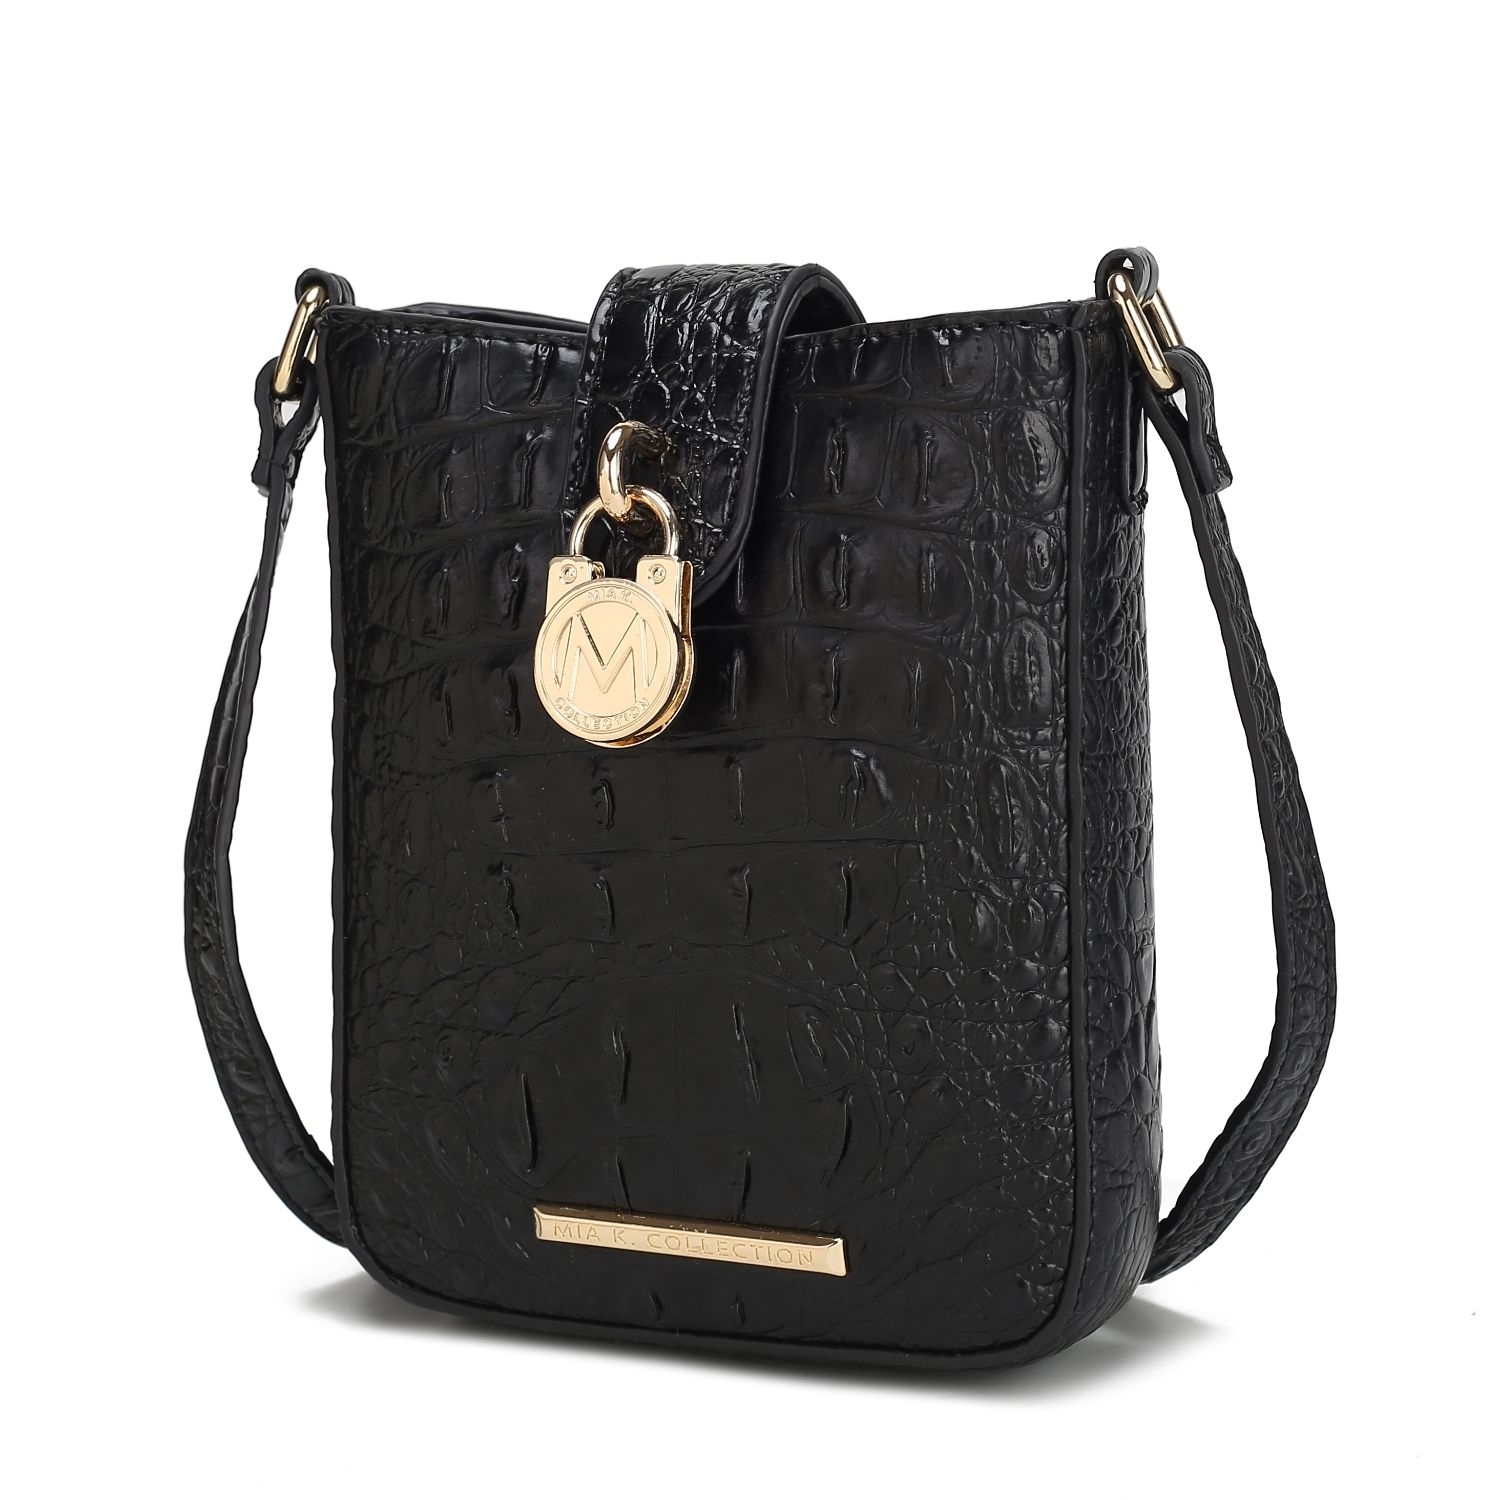 MKF Collection Avery Faux Crocodile Embossed Vegan Leather Women's Crossbody Bag By Mia K - Taupe